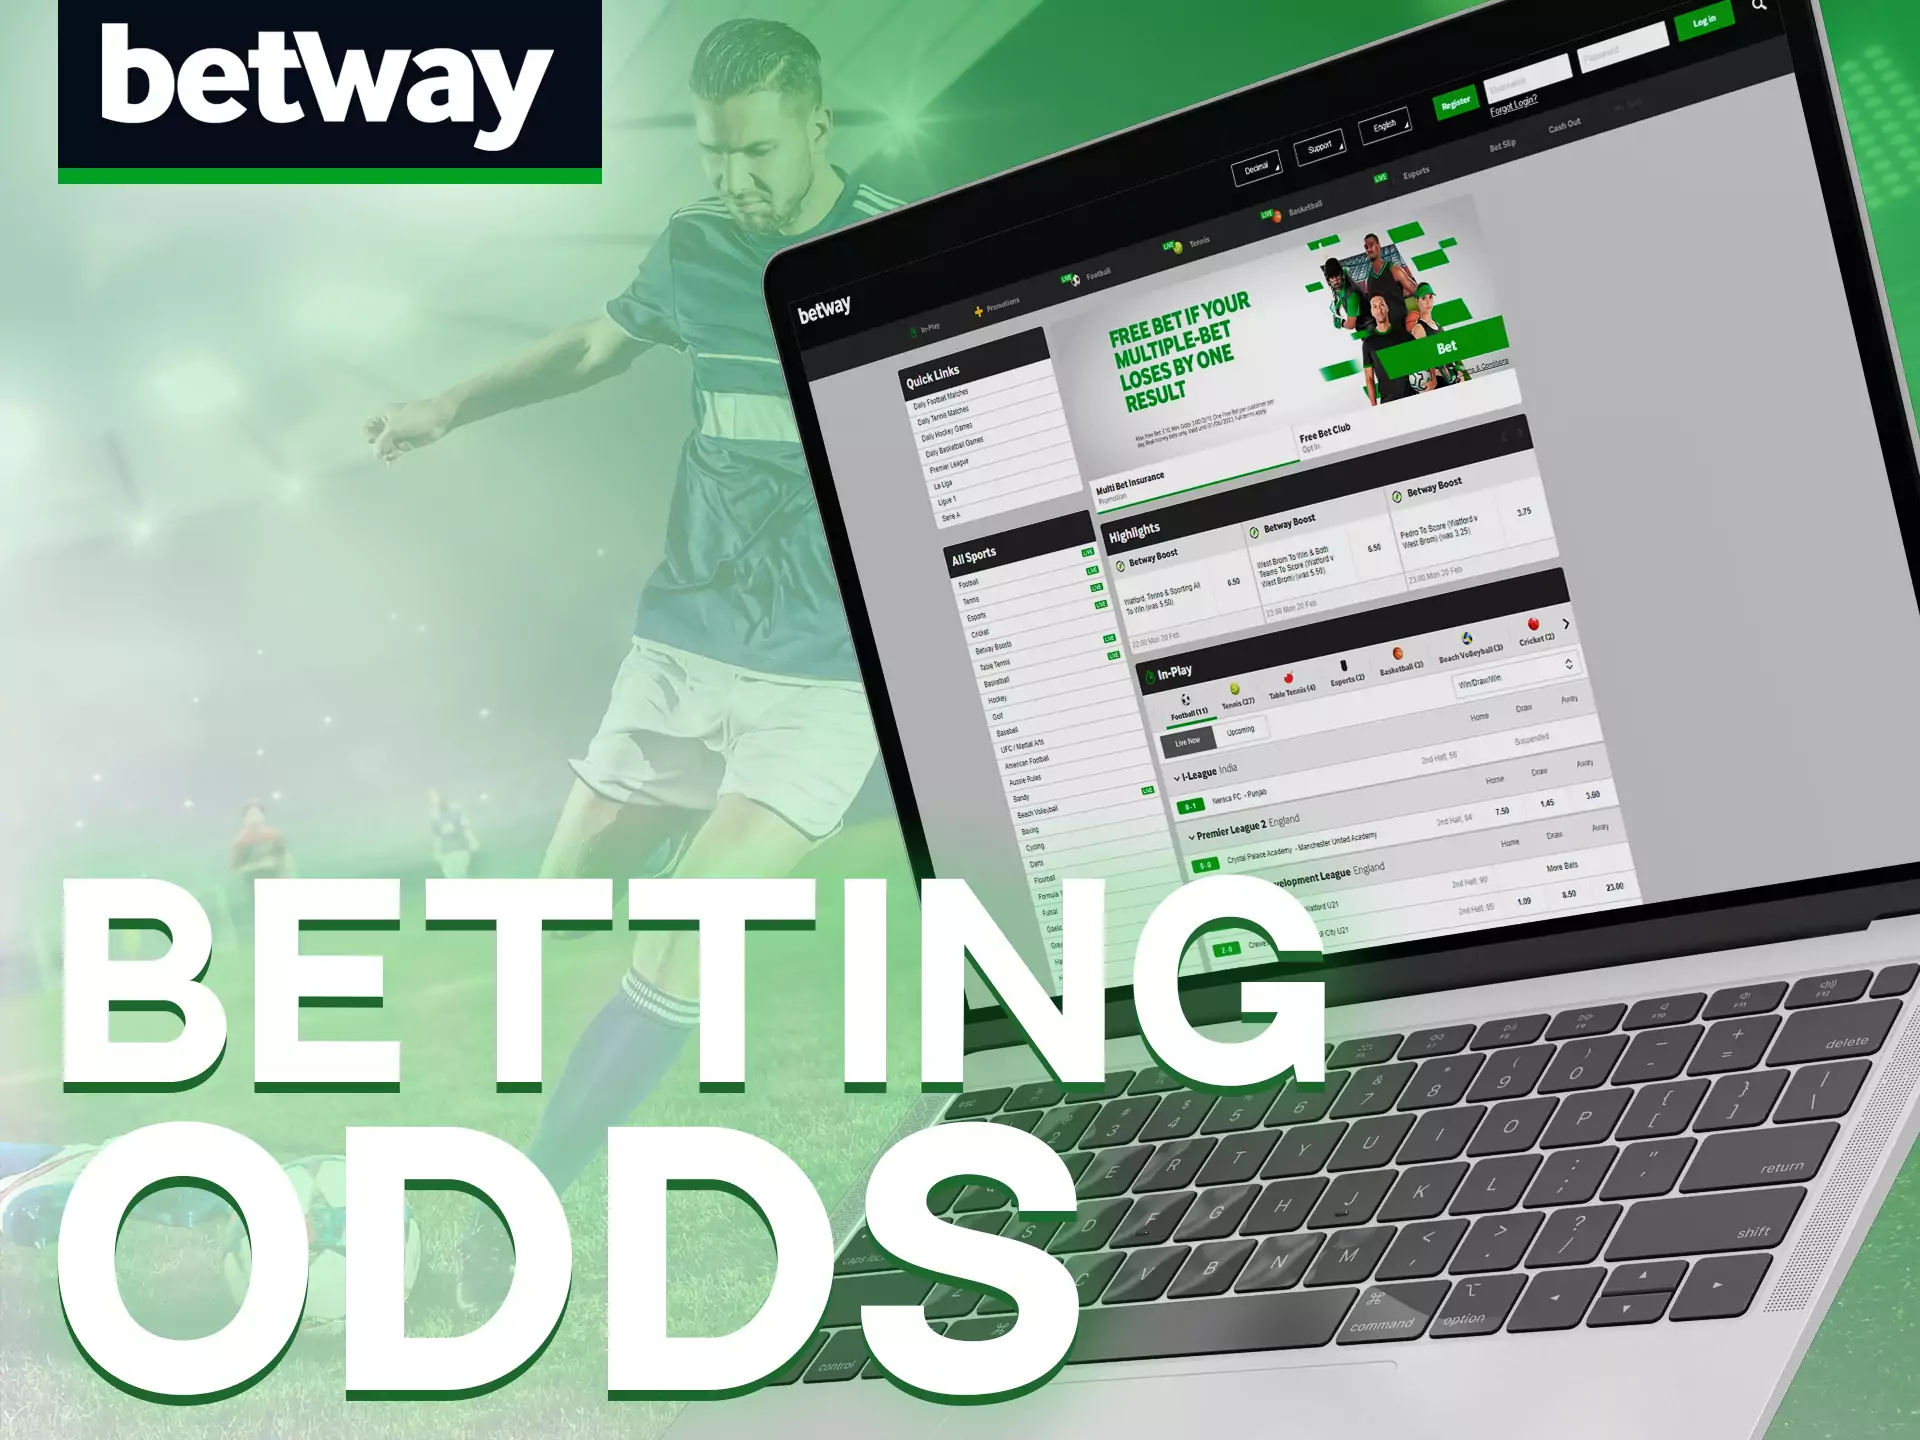 Calculate odds and make sure bets at Betway.